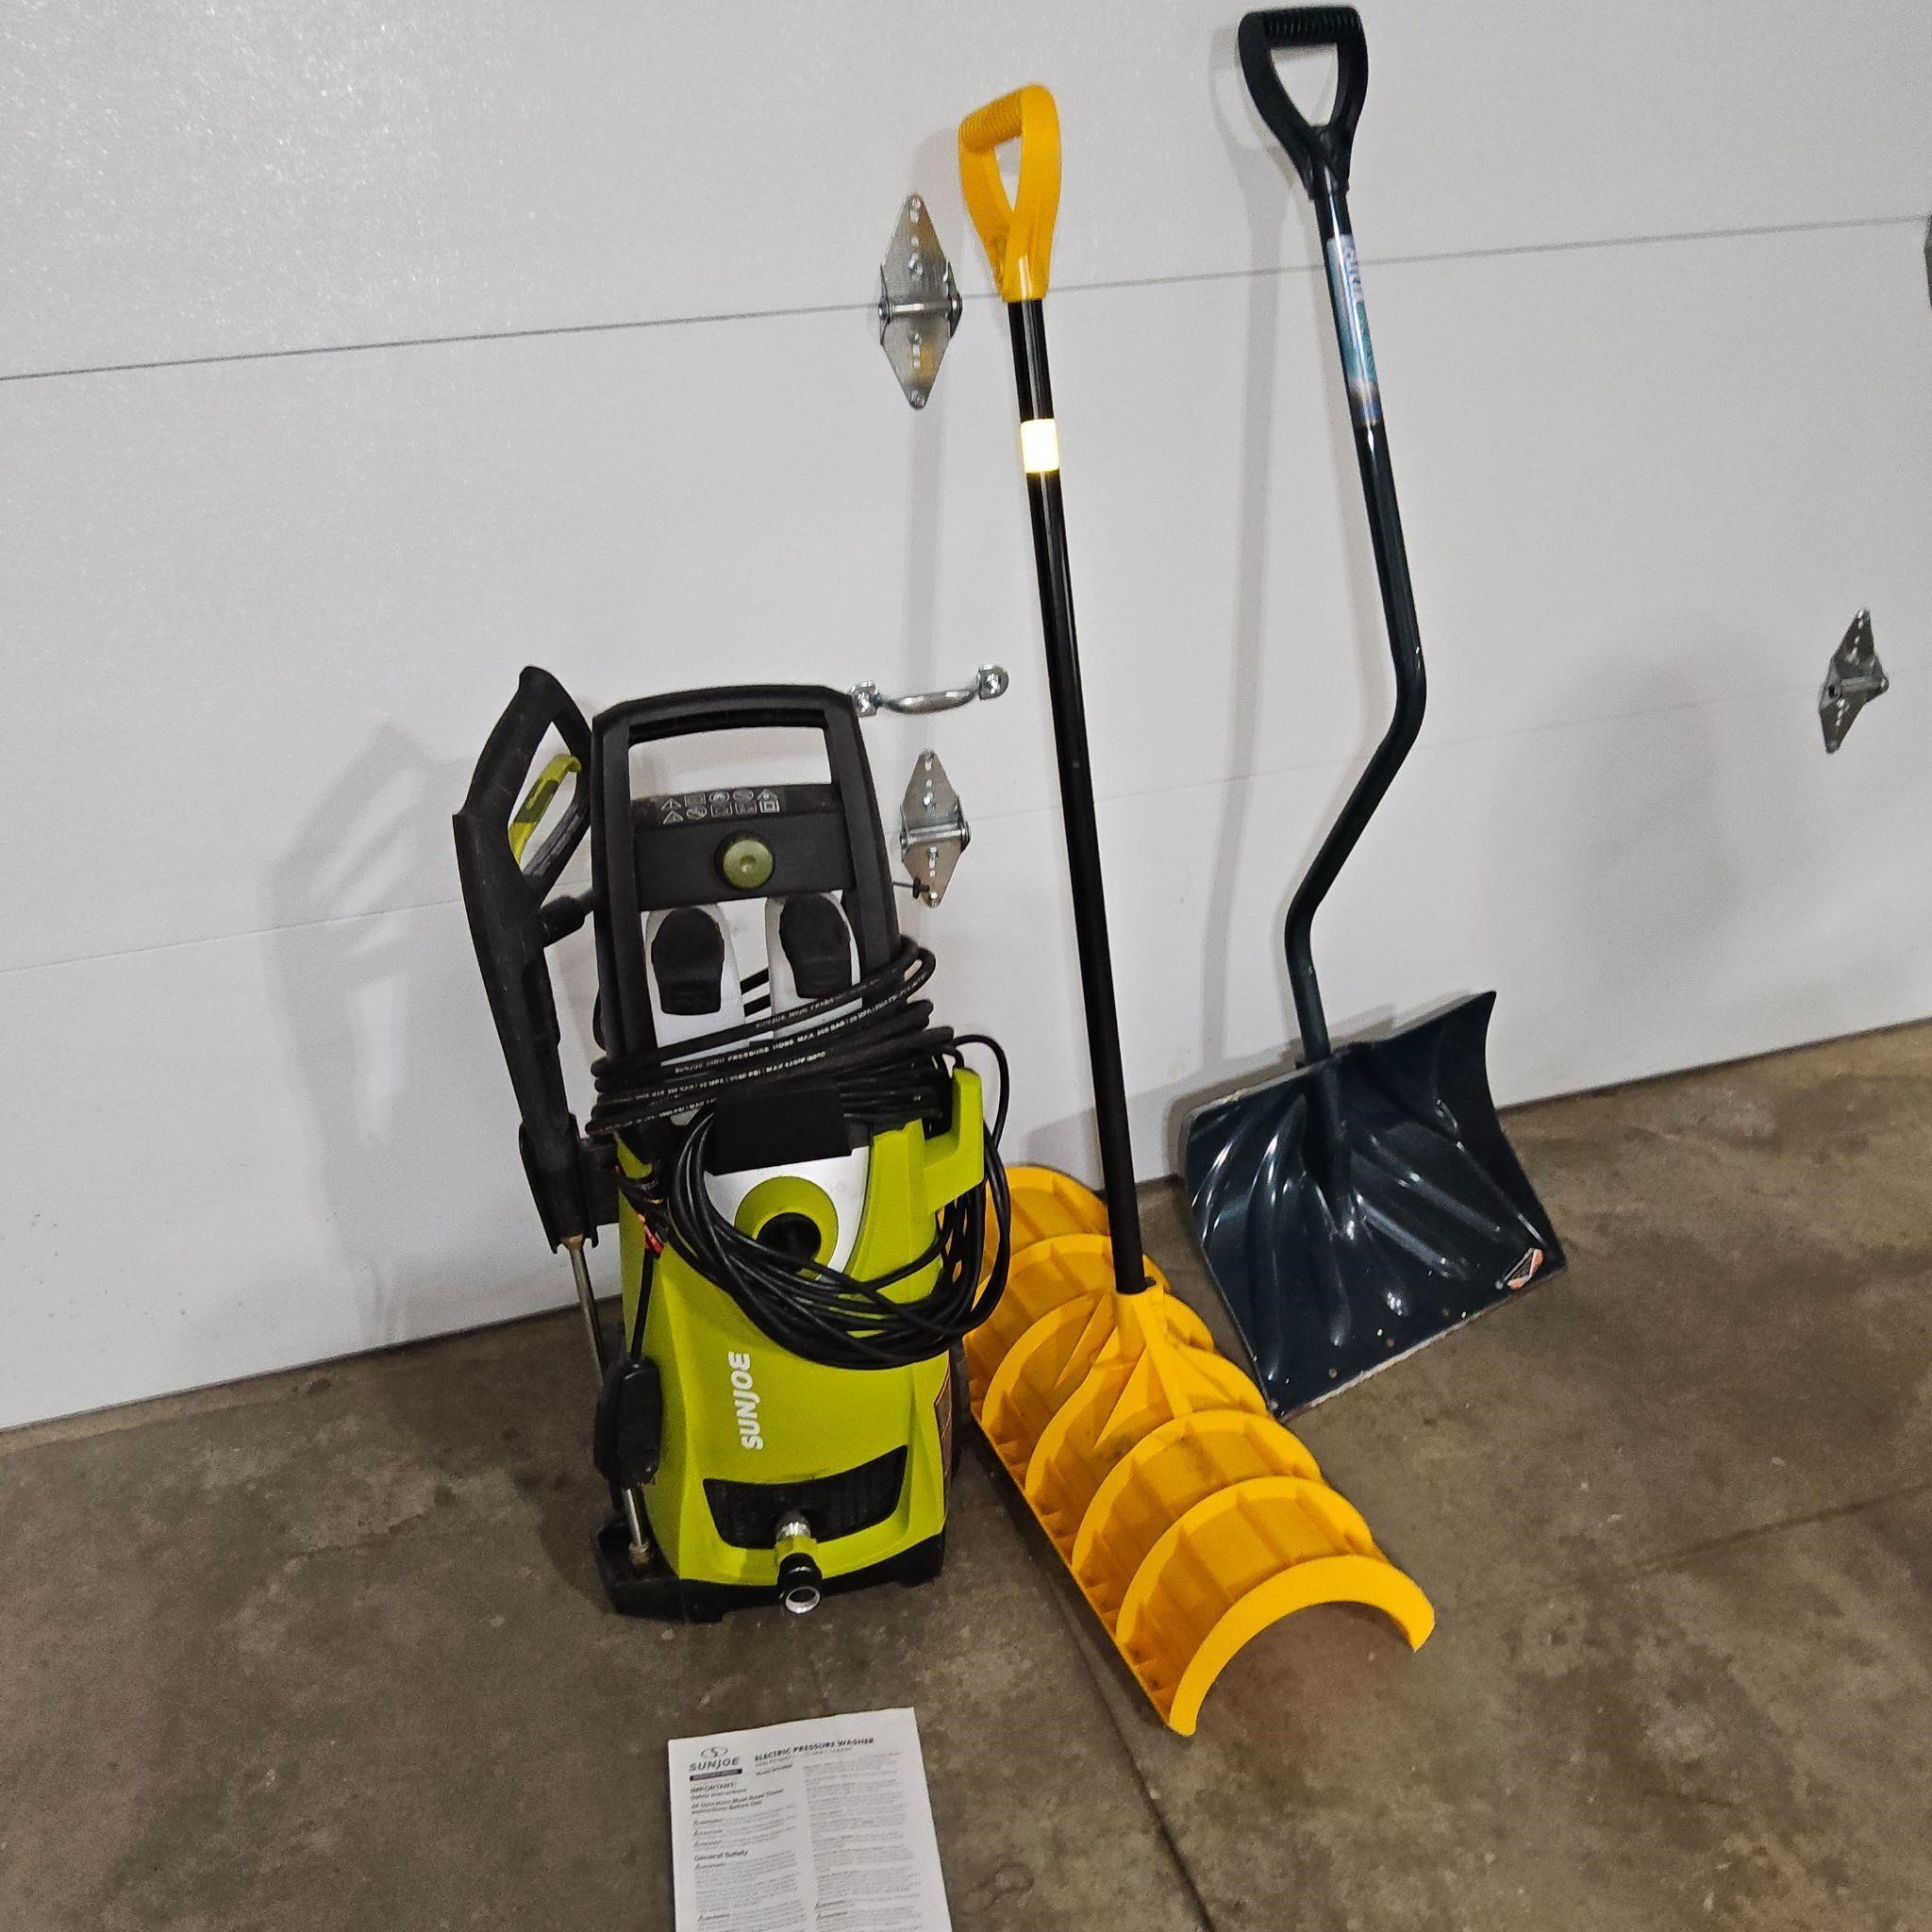 PRESSURE WASHER AND MORE